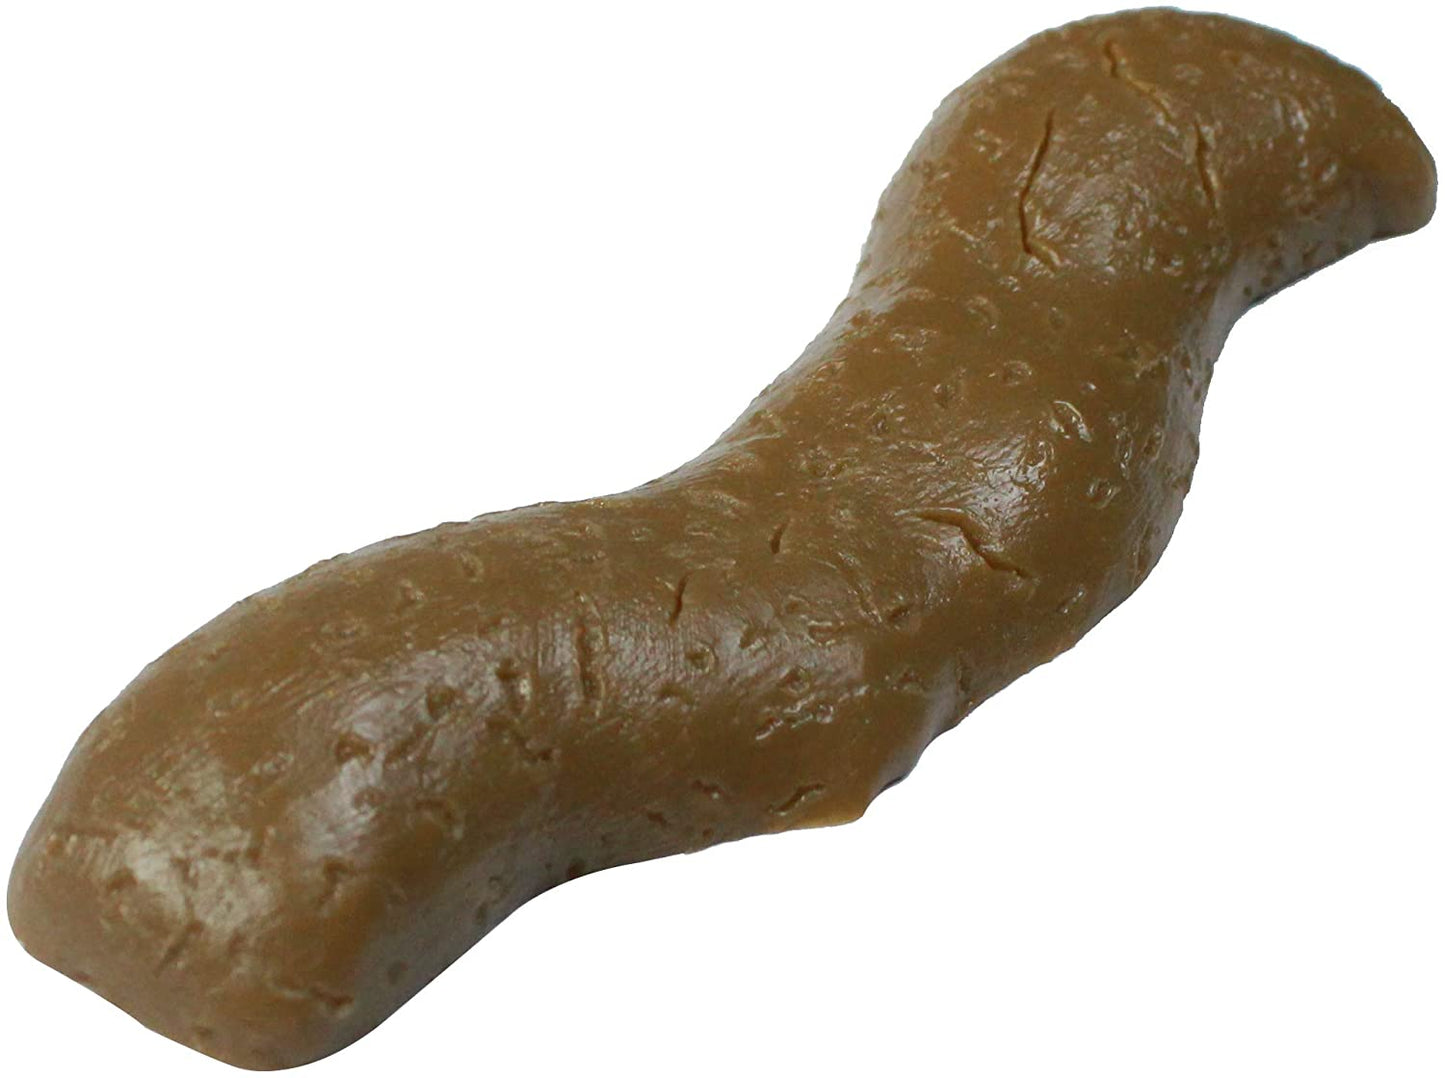 2 Pack of Novelty Fake Poop Toys, Floats on Water, Perfect Gag Gift, Prank Gift, Two Realistic Poop Designs, Fake turd for Real Laughs